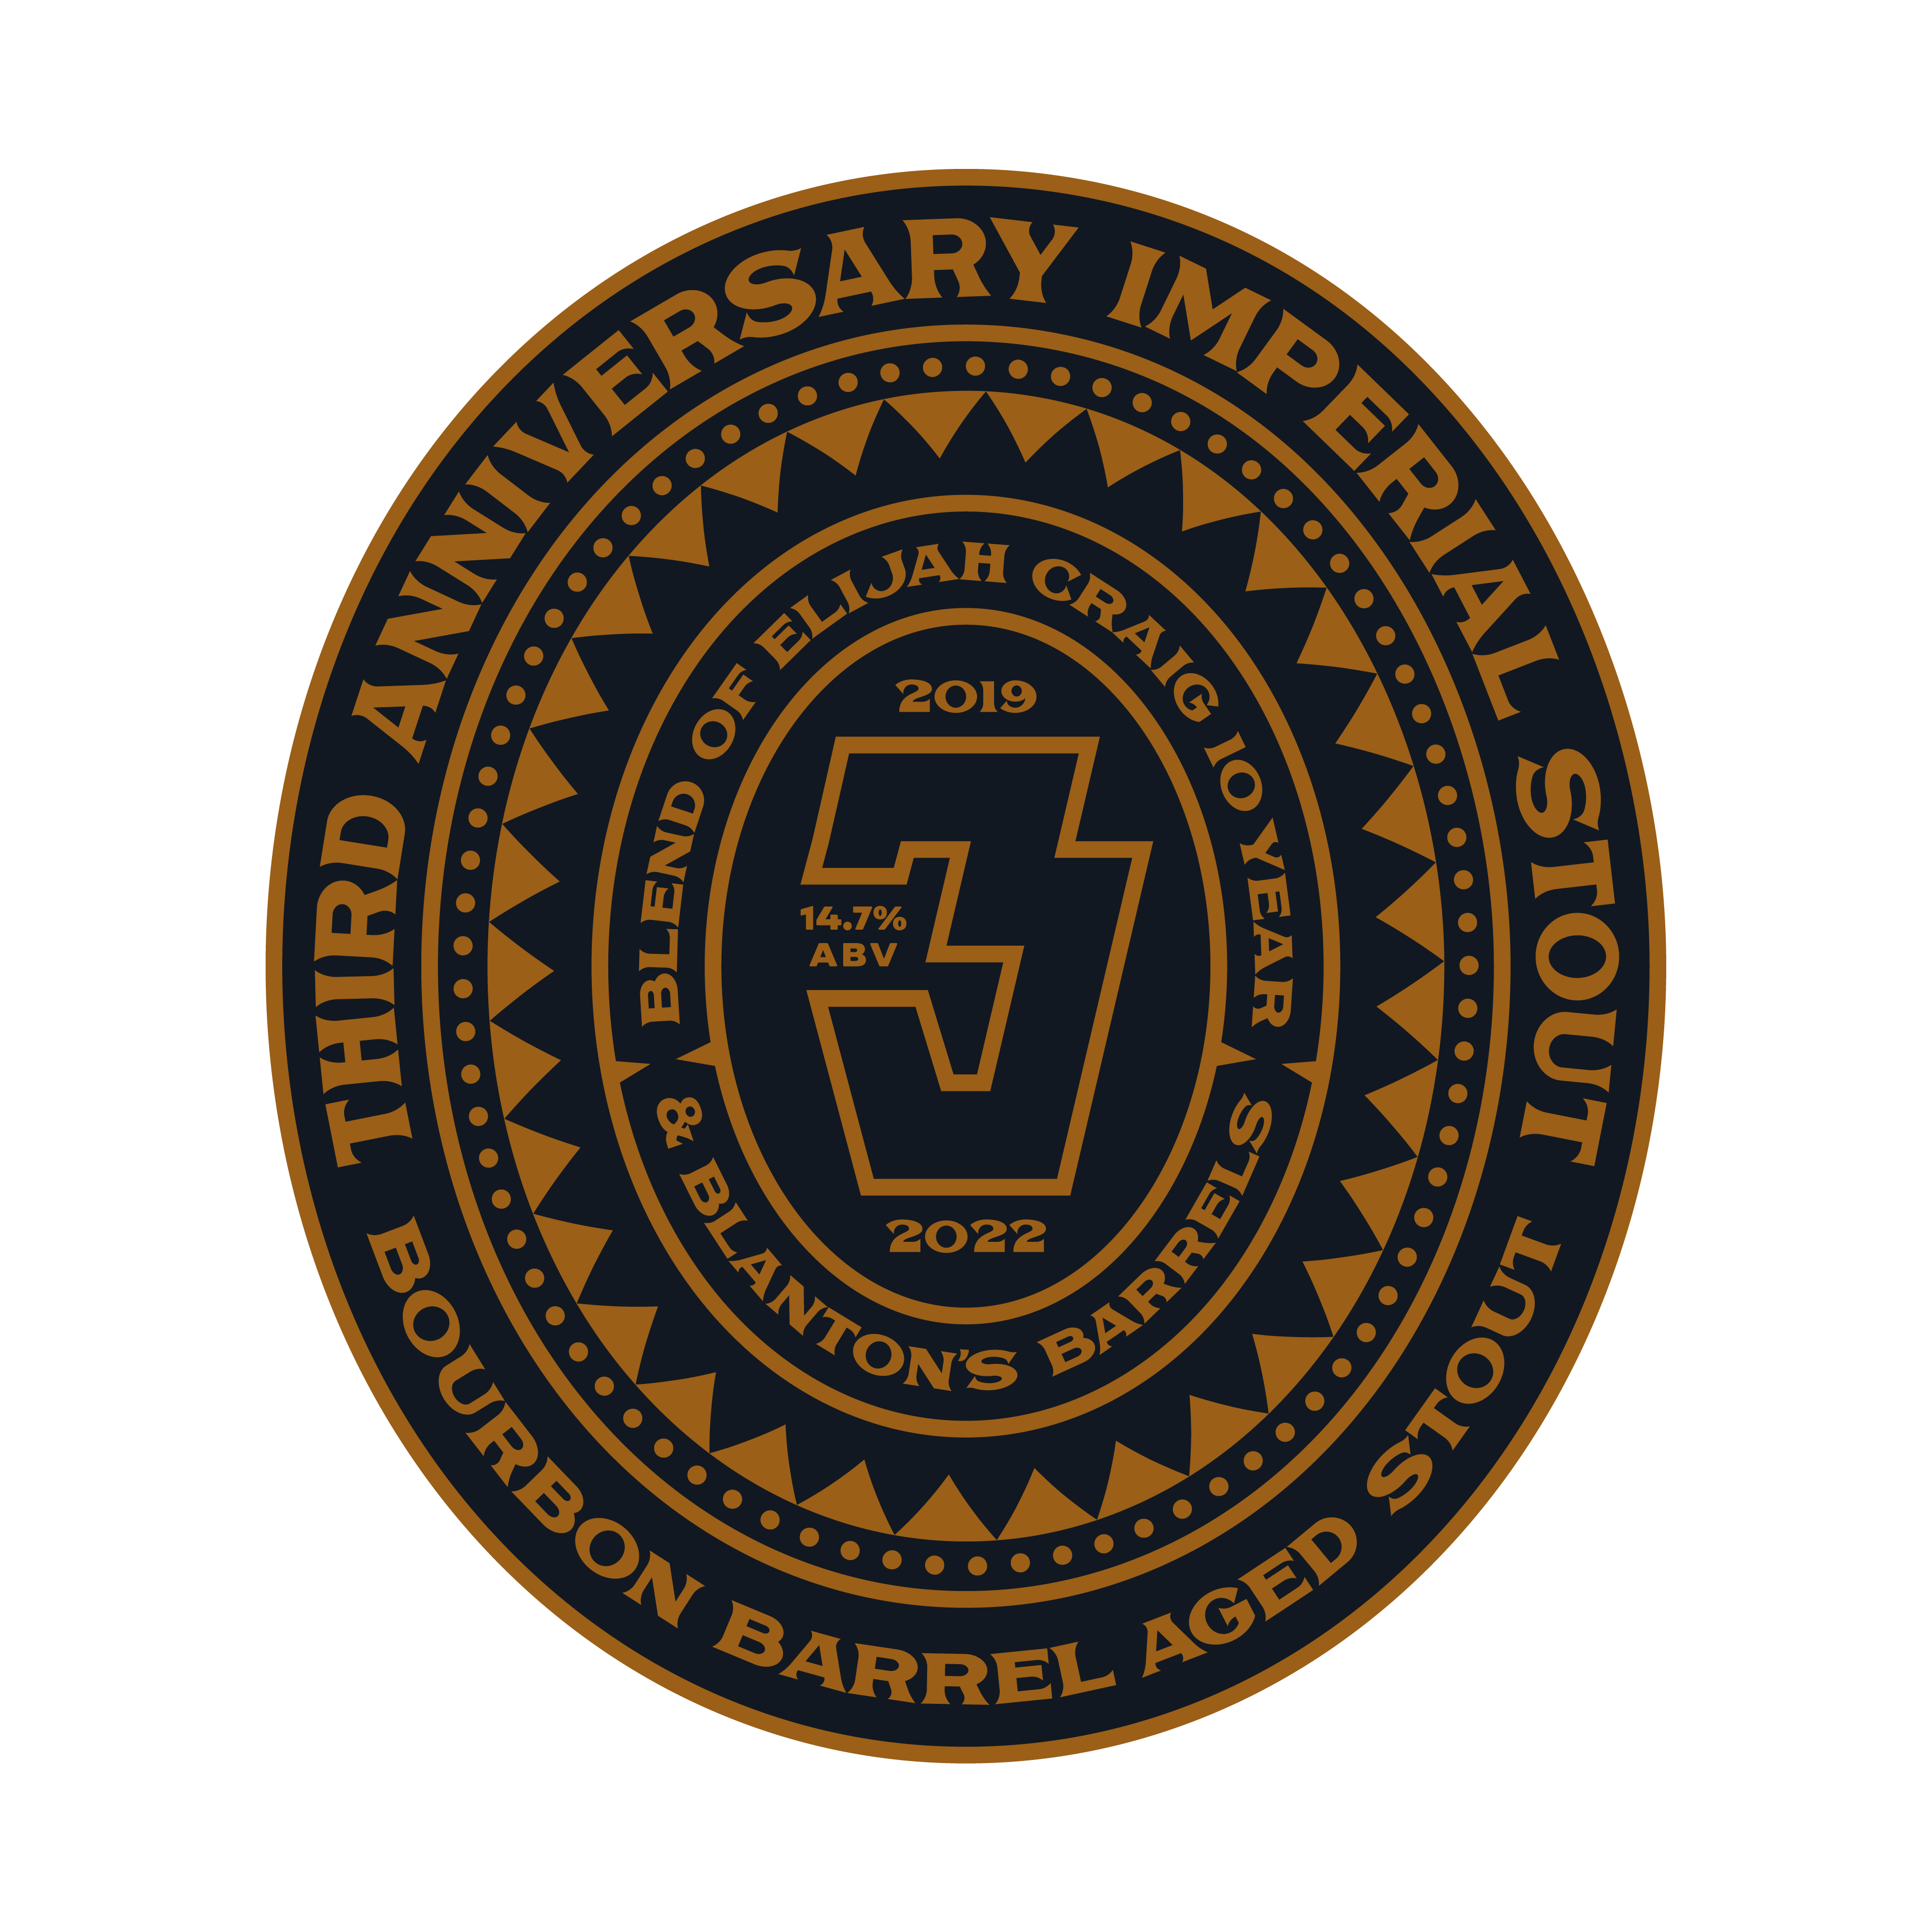 3rd Anniversary Barrel-aged Stout Badge logo design by logo designer Brethren Design Co. for your inspiration and for the worlds largest logo competition